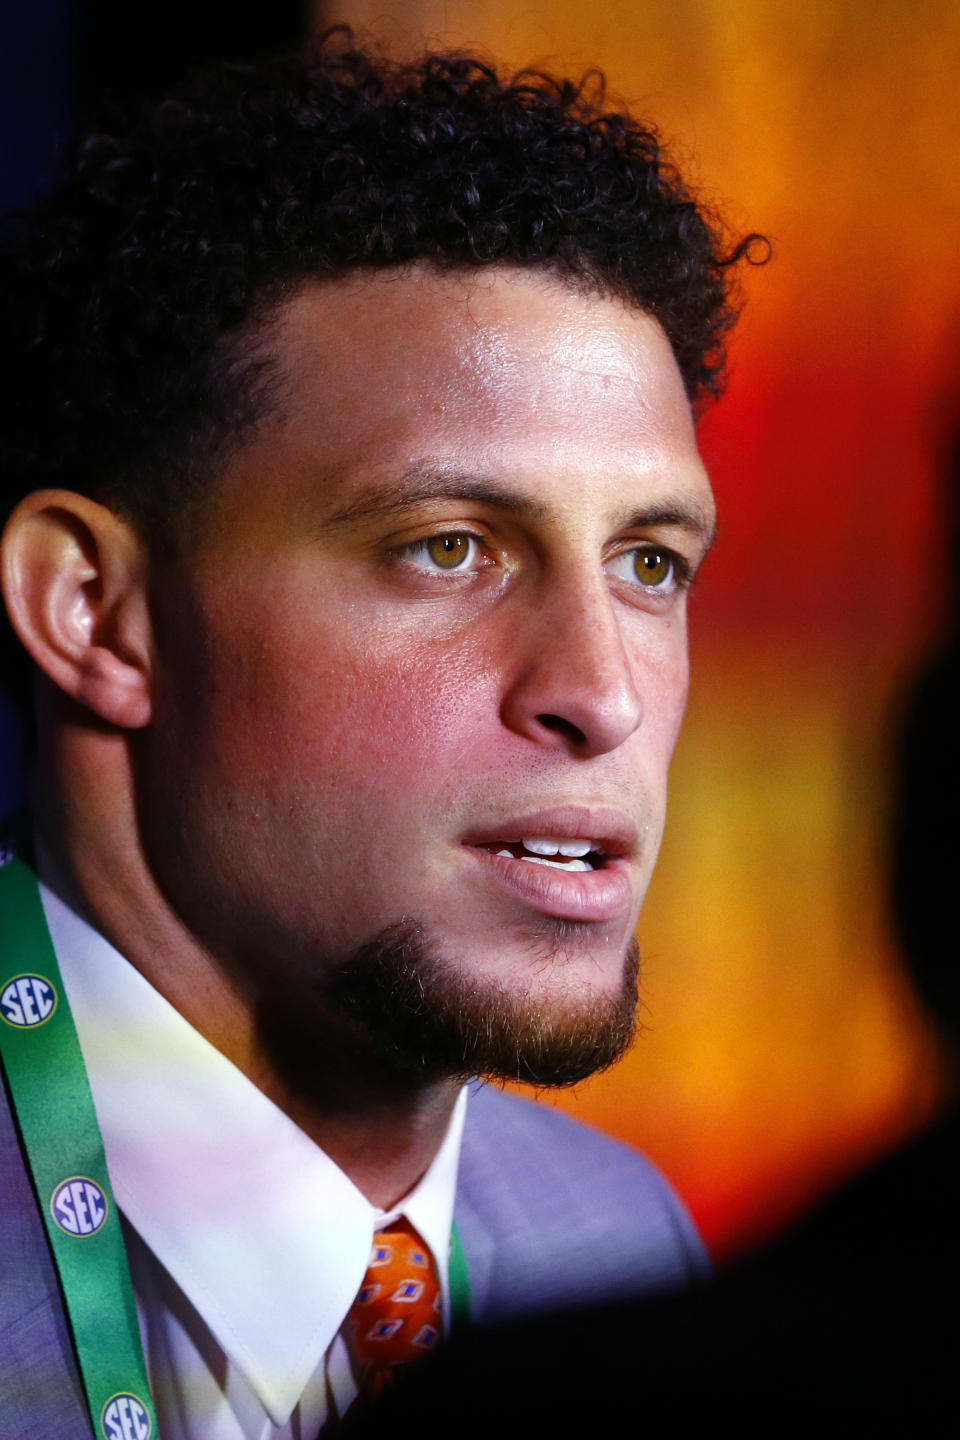 Florida quarterback Feleipe Franks speaks during the NCAA college football Southeastern Conference Media Days, Monday, July 15, 2019, in Hoover, Ala. (AP Photo/Butch Dill)